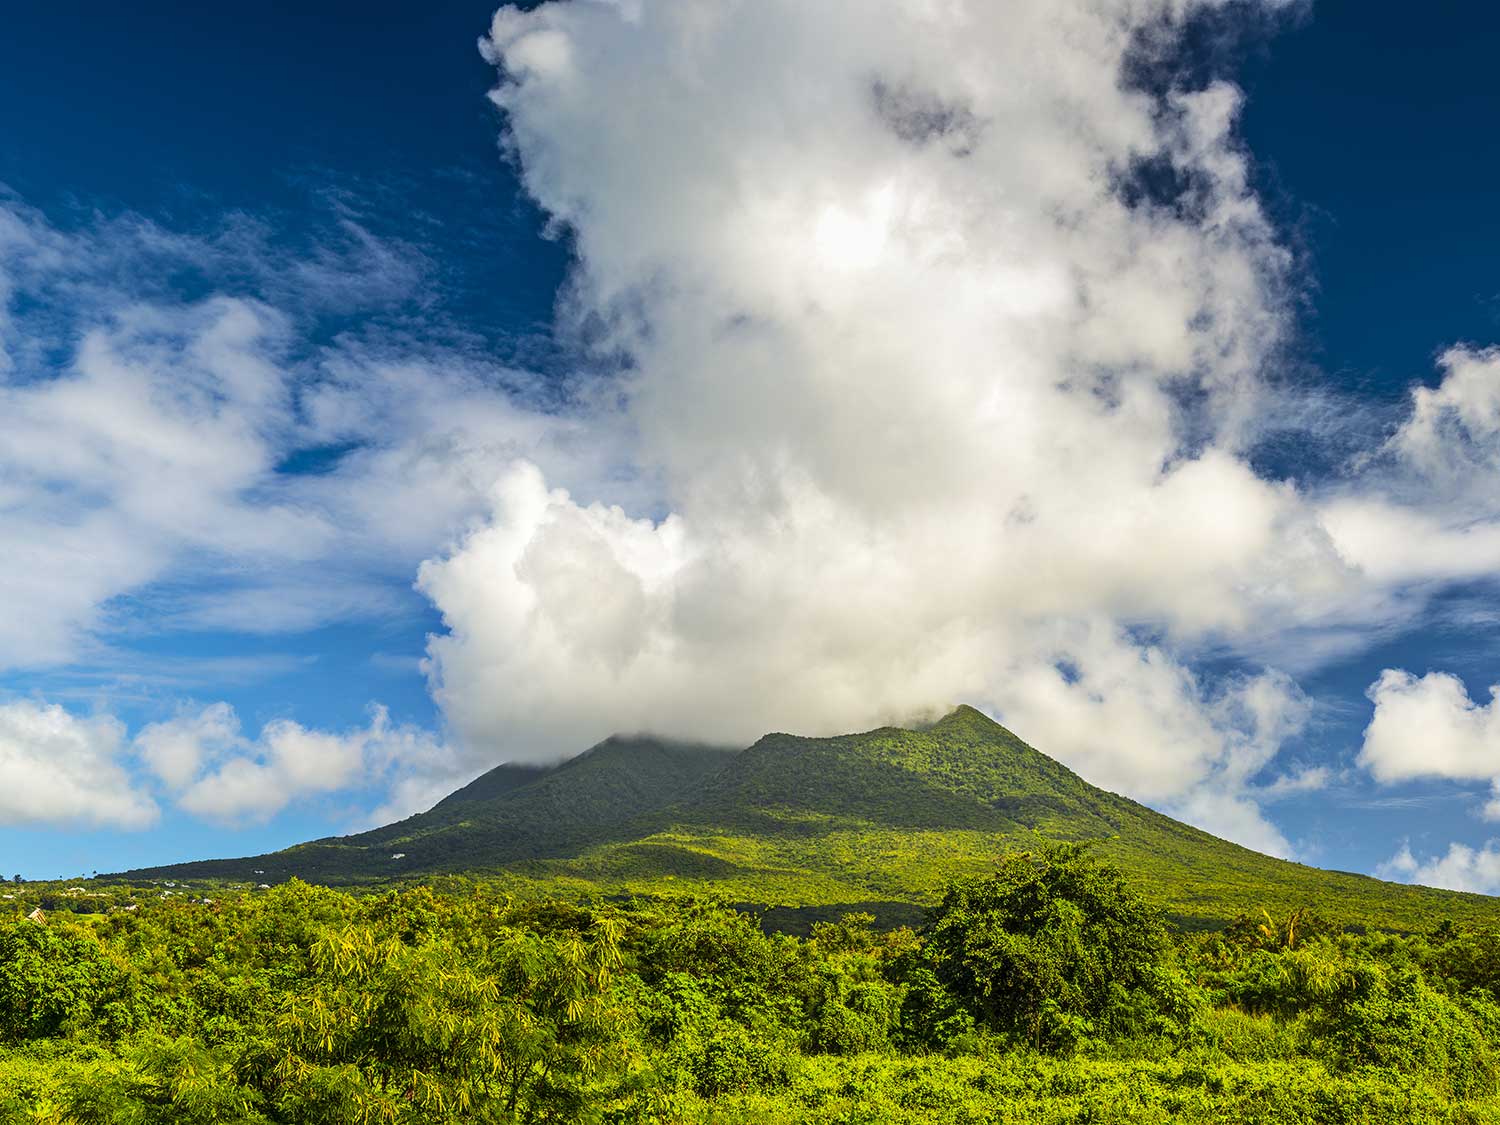 A view of the lush, green mountains of Nevis Peak.